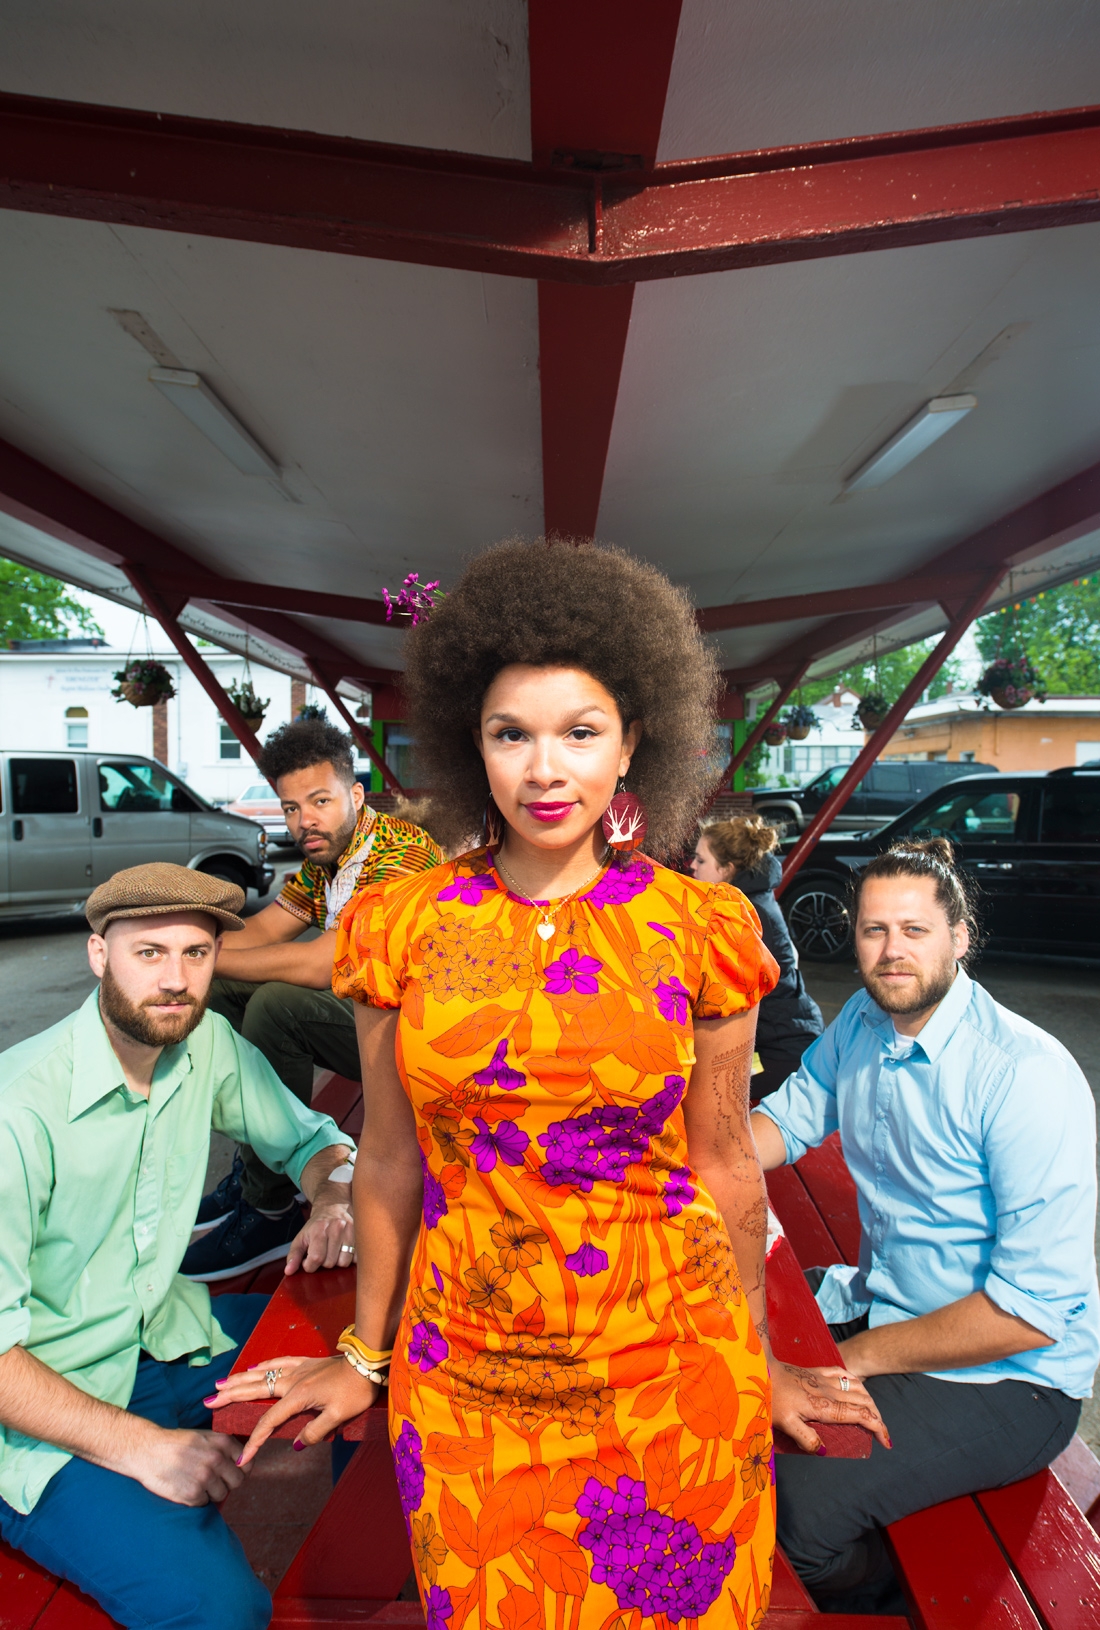 Music With A Message: Vox Vidorra readies for hot summer ahead of politically heated new LP